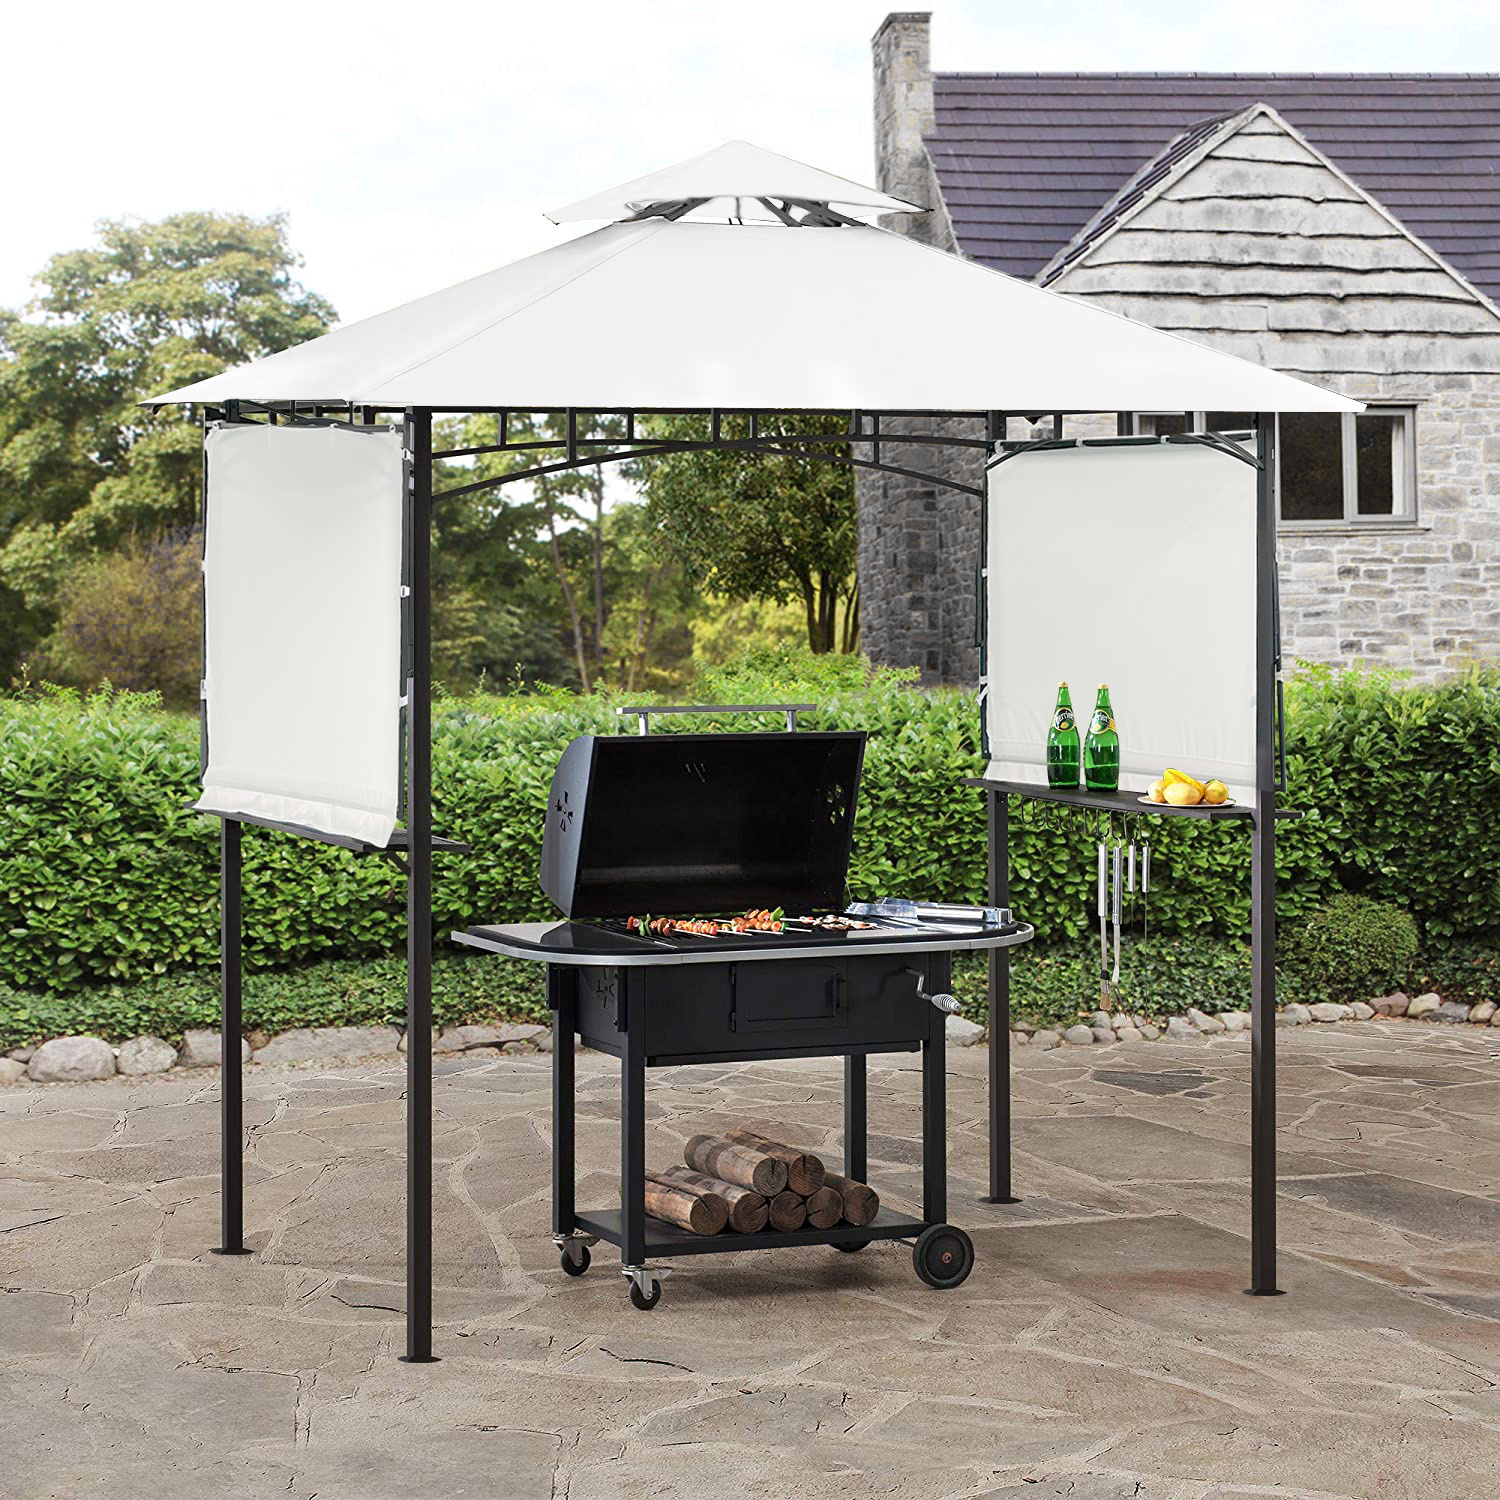 13.5x4.5 Ft Grill Gazebo Double Tier BBQ Gazebo with Dual Side Extendable Shades Outdoor Barbecue Grill Gazebo Shelter with 2 Side Shelves and Heavy-Duty Steel Frame for Patio, Garden, Beach, White - image 1 of 7